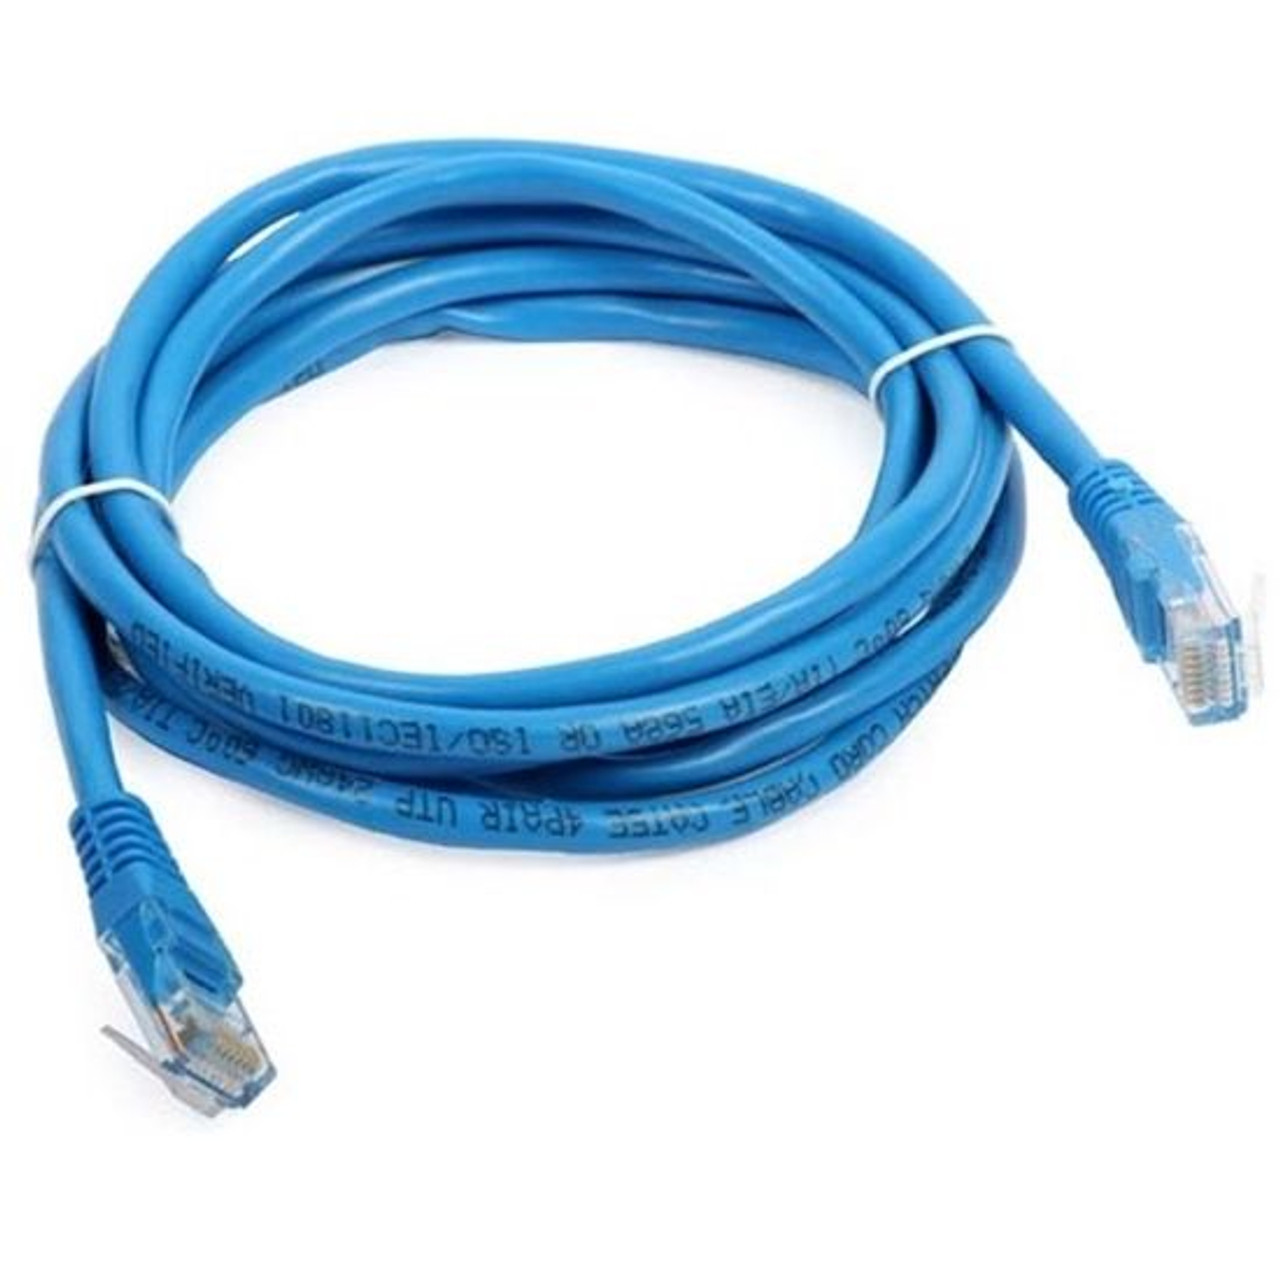 Steren 308-507BL 7 FT CAT5e Cable Blue Patch Cord UTP RJ45 350 MHz Ethernet Network 24 AWG Copper Stranded Male to Male RJ-45 Enhanced Category 5e High Speed Data Computer Gaming Jumper, Part # 308507-BL